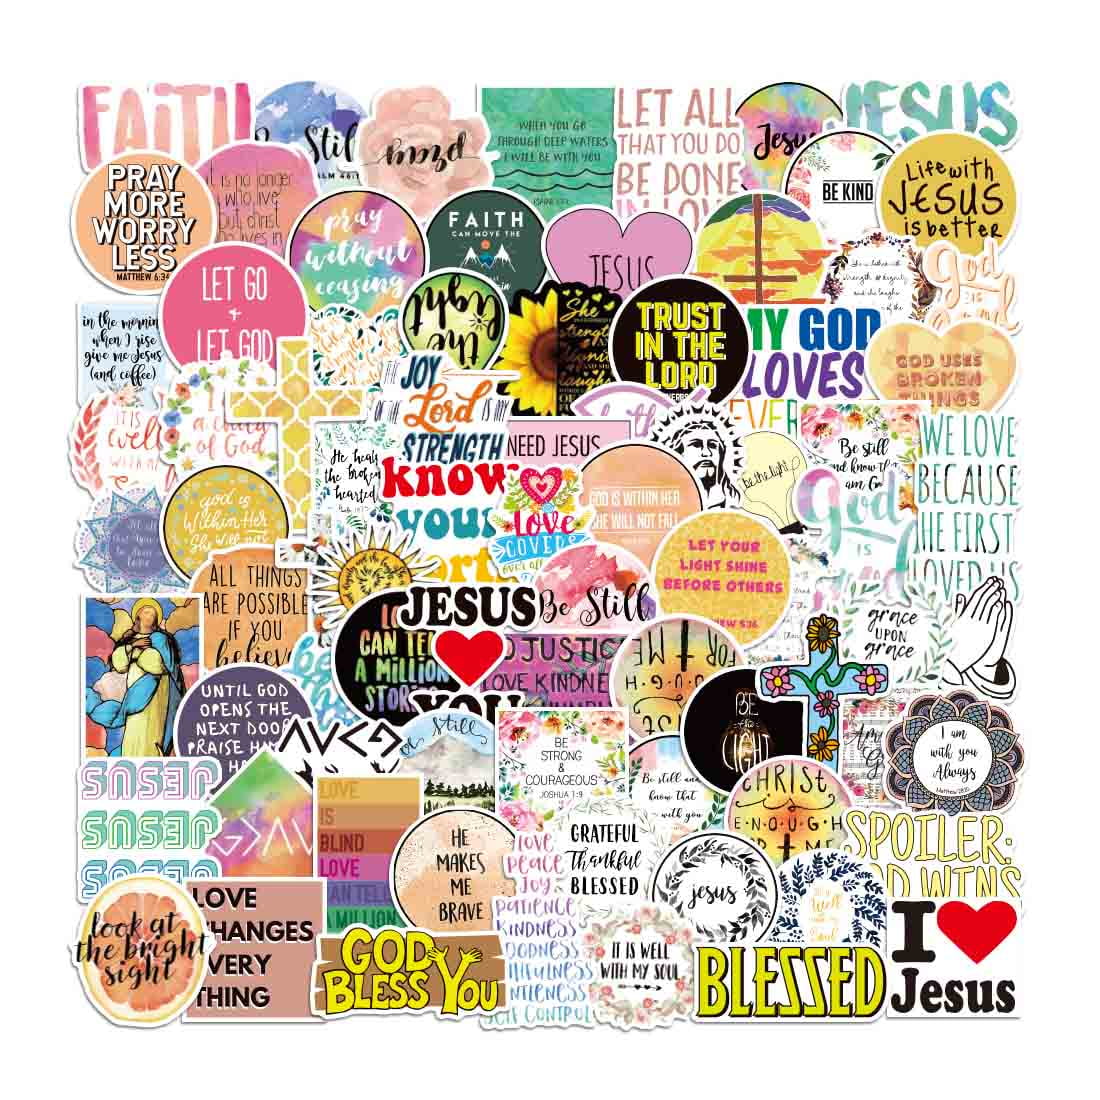  Miraki It Is Finished Sticker, Catholic Stickers, Bible Verse  Sticker, Christian Stickers, Inspitational Sticker, Water Assitant Die-Cut  Jesus Decals for Laptop, Phone, Water Bottles, Kindle Sticker : Handmade  Products